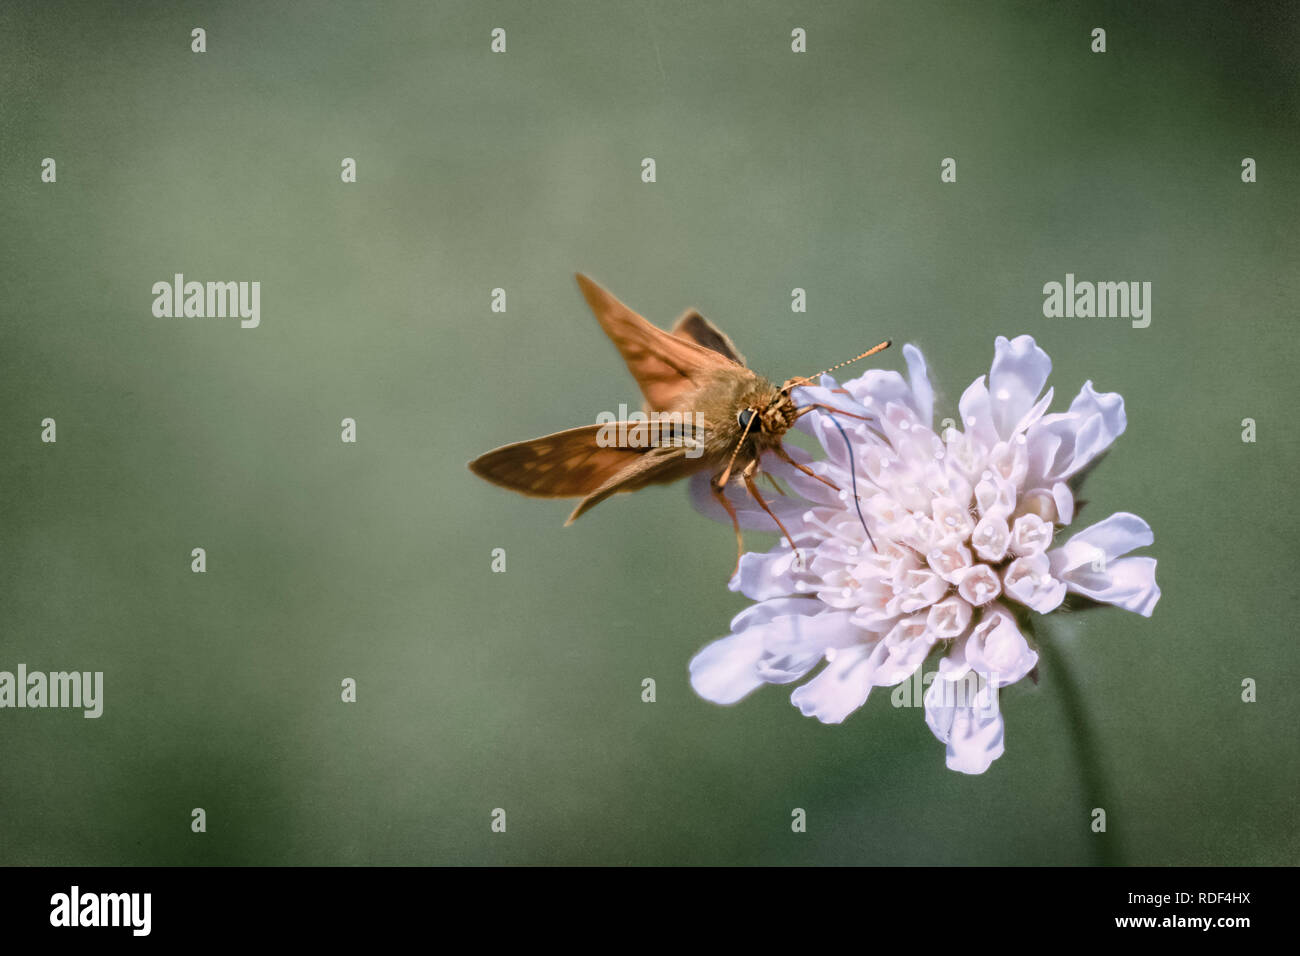 Skipper sitting on a scabiosa in front a homogeneous background background Stock Photo